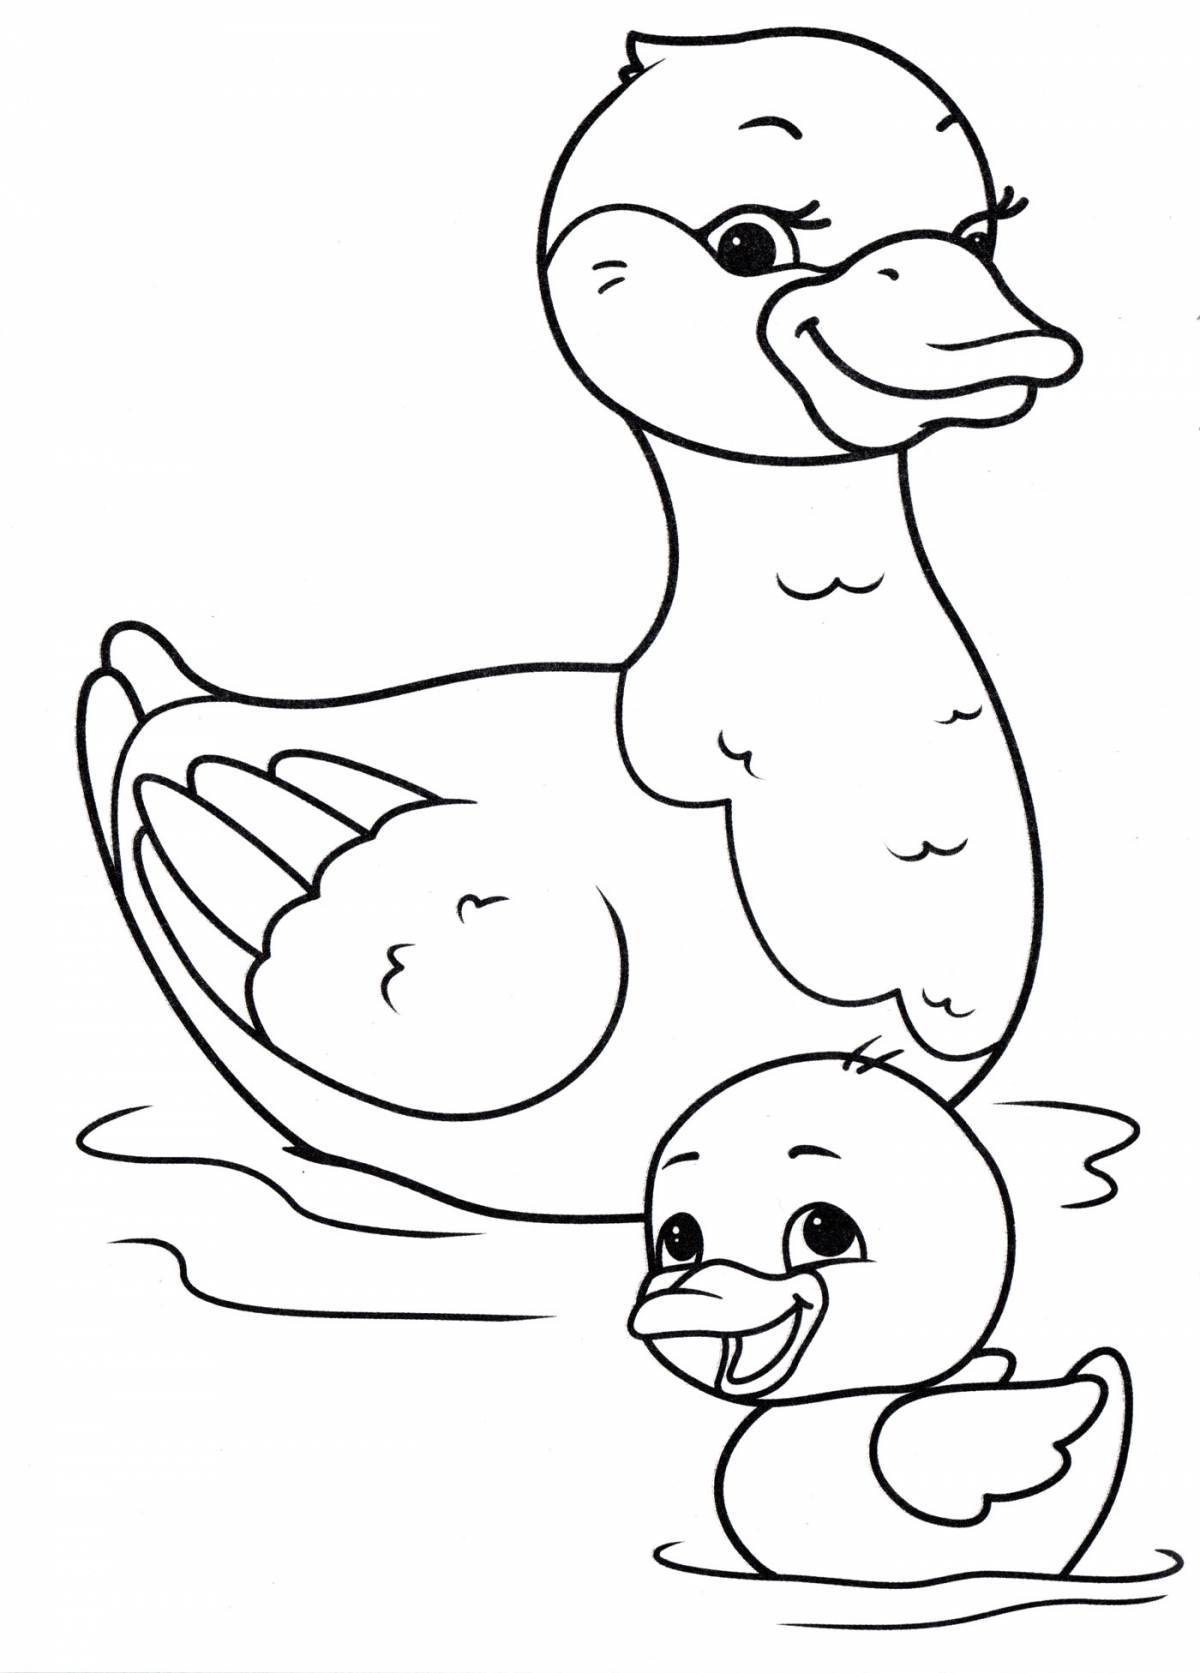 Happy duck coloring book for kids